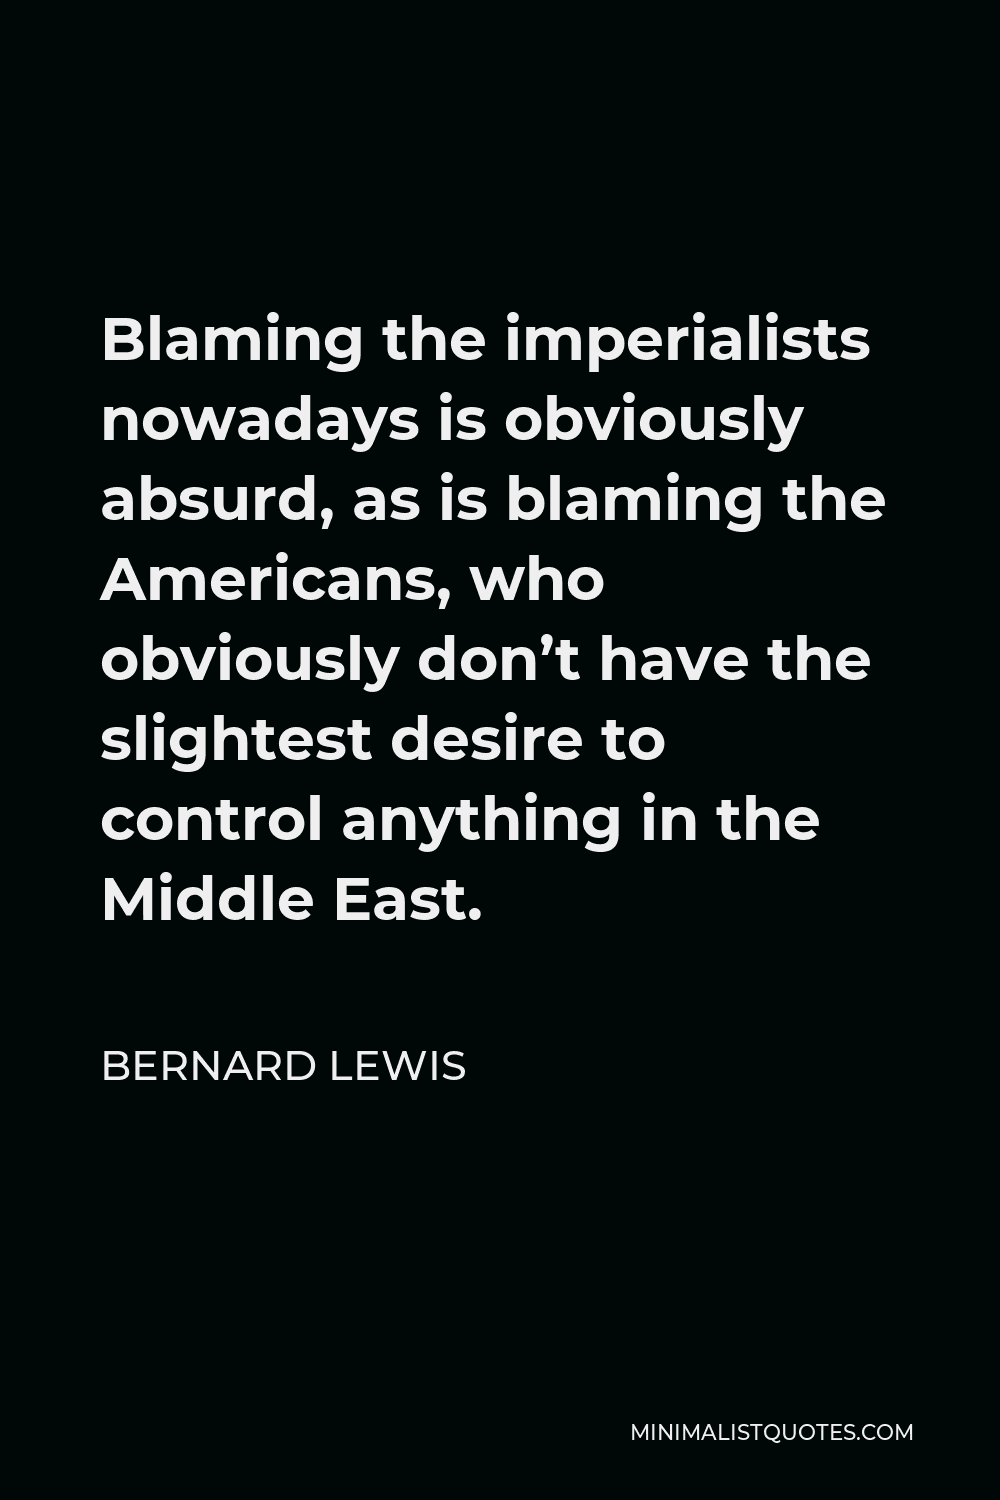 Bernard Lewis Quote - Blaming the imperialists nowadays is obviously absurd, as is blaming the Americans, who obviously don’t have the slightest desire to control anything in the Middle East.